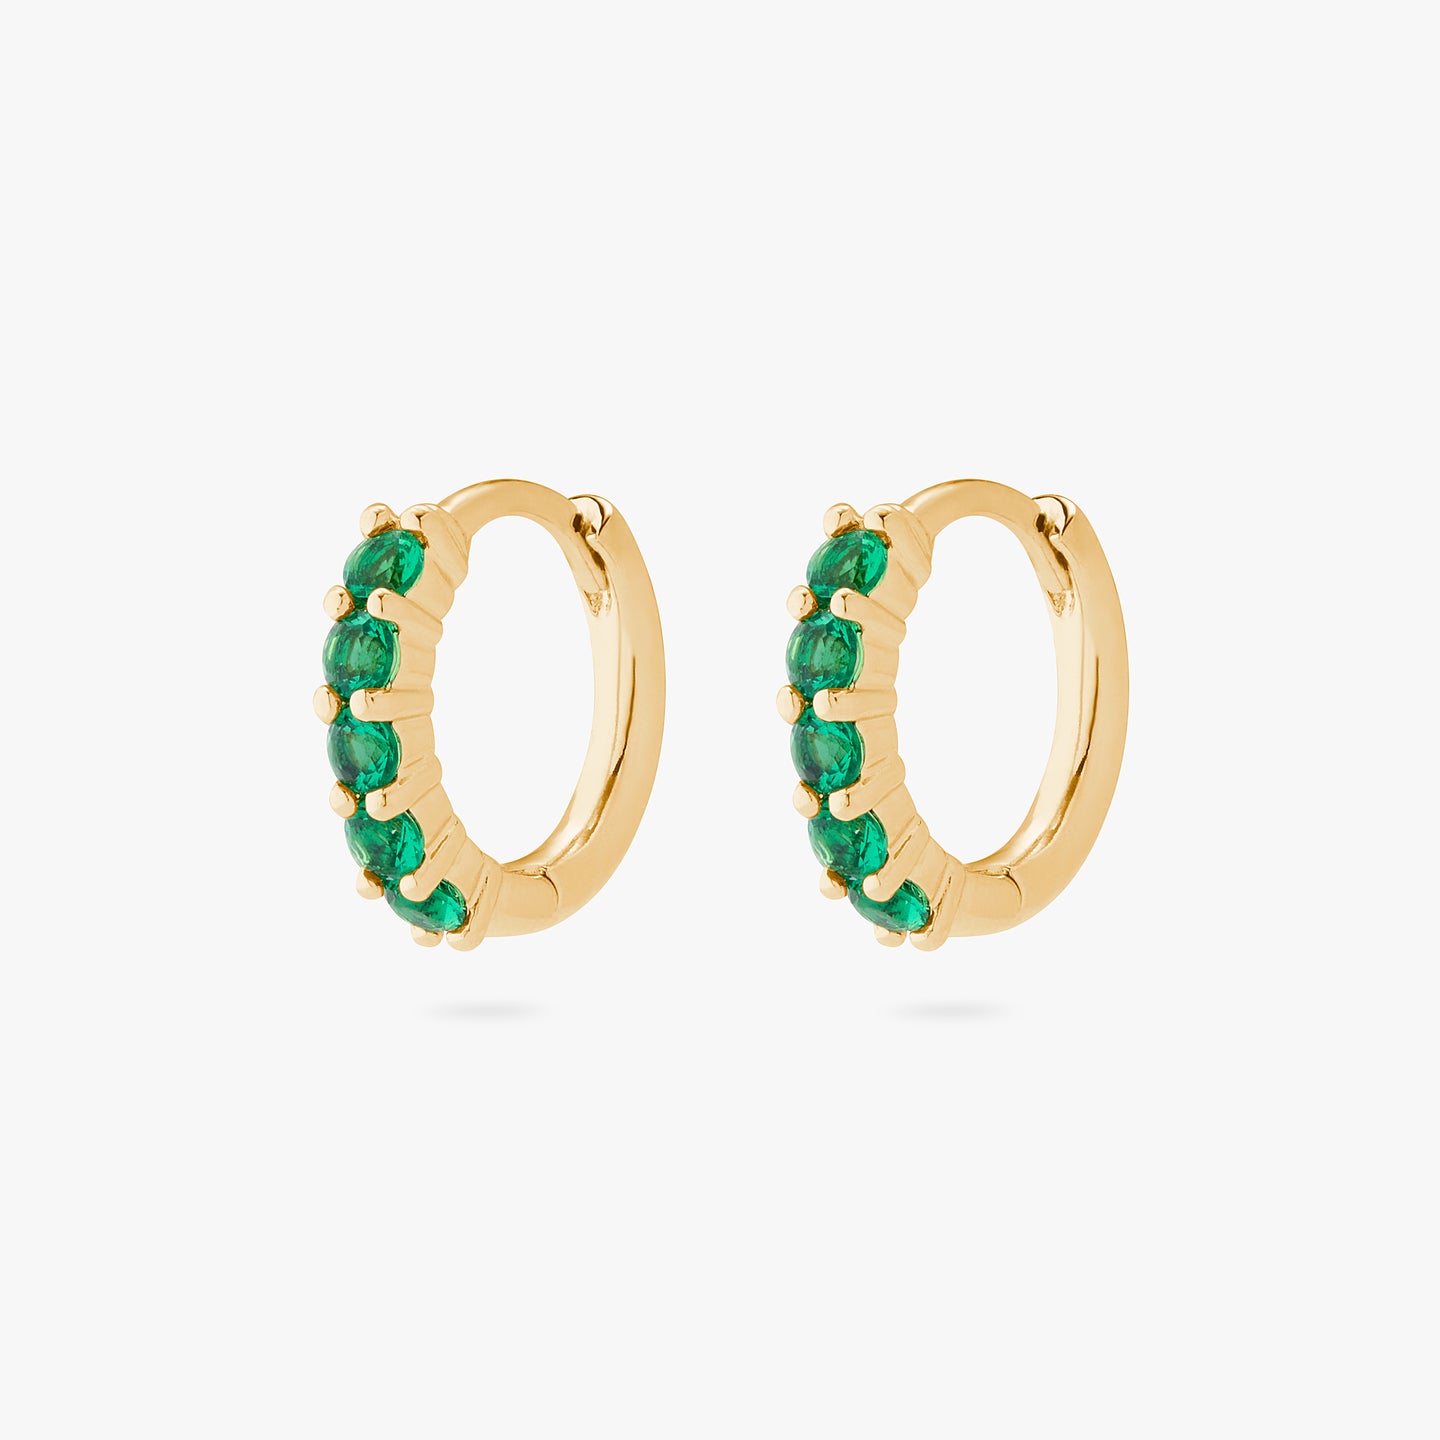 An image of a pair of gold/green pave huggies with max pave stones. [hover] color:null|gold/green